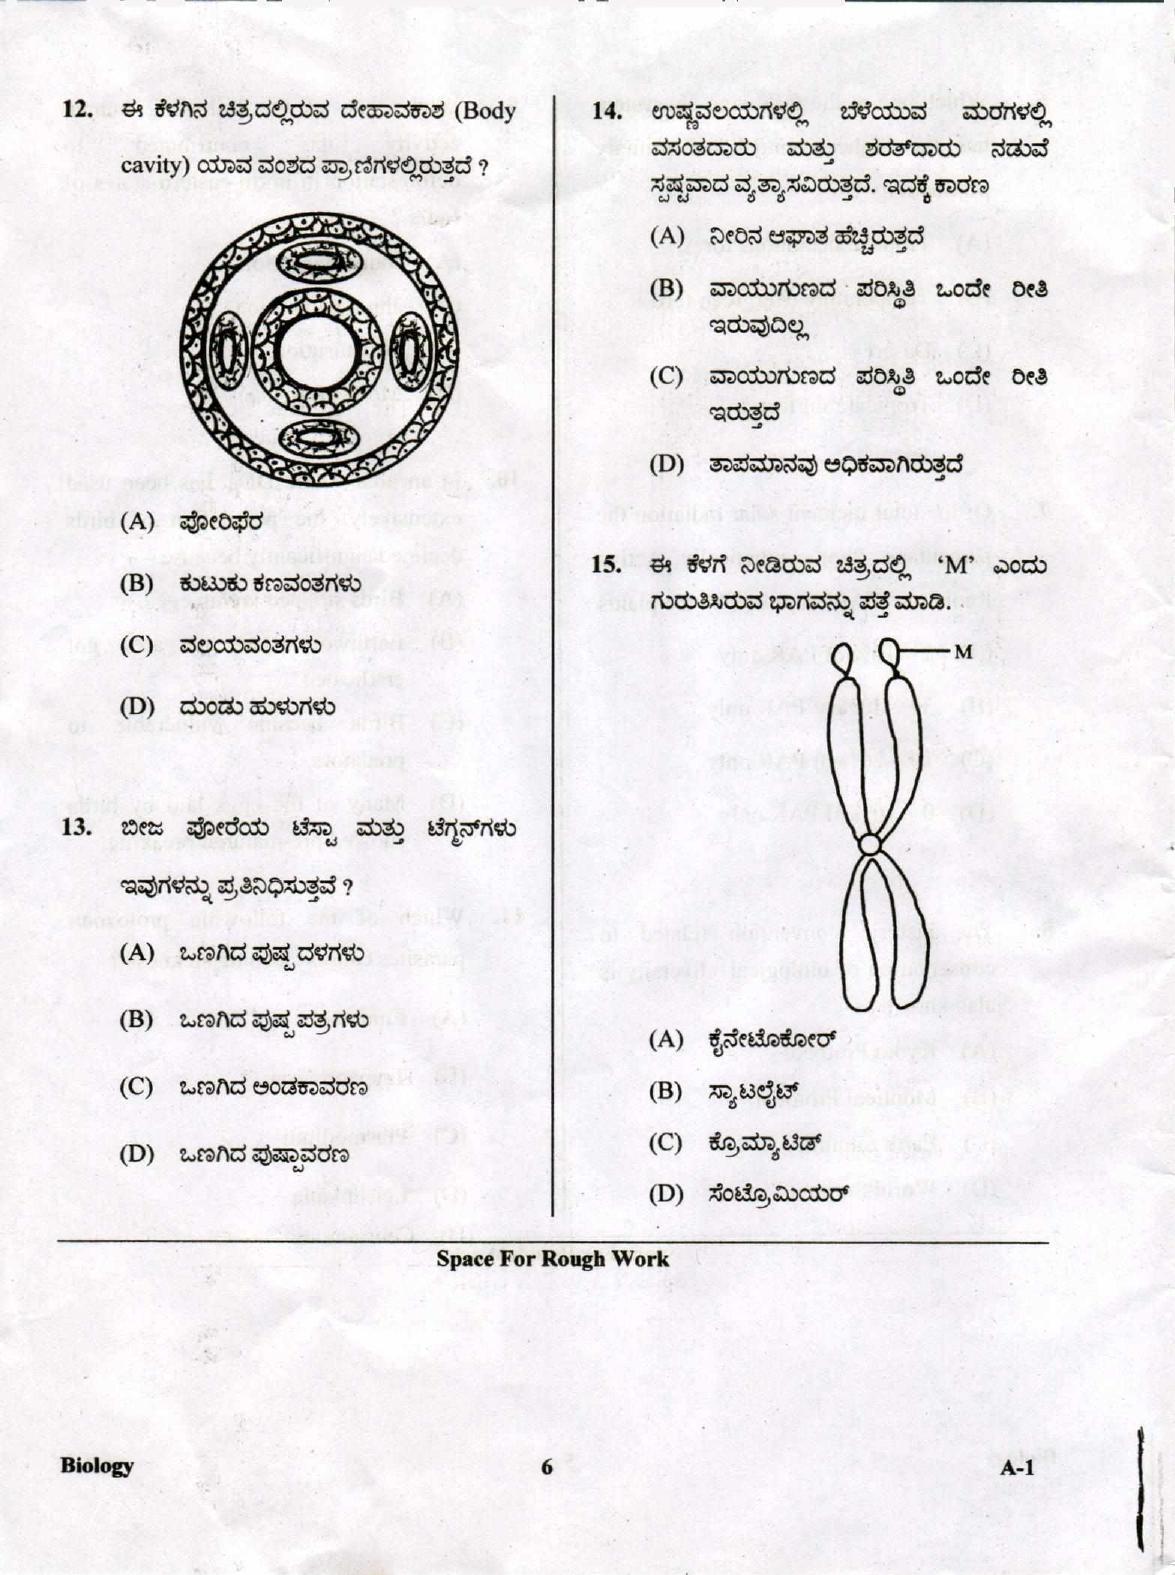 KCET Biology 2019 Question Papers - Page 6